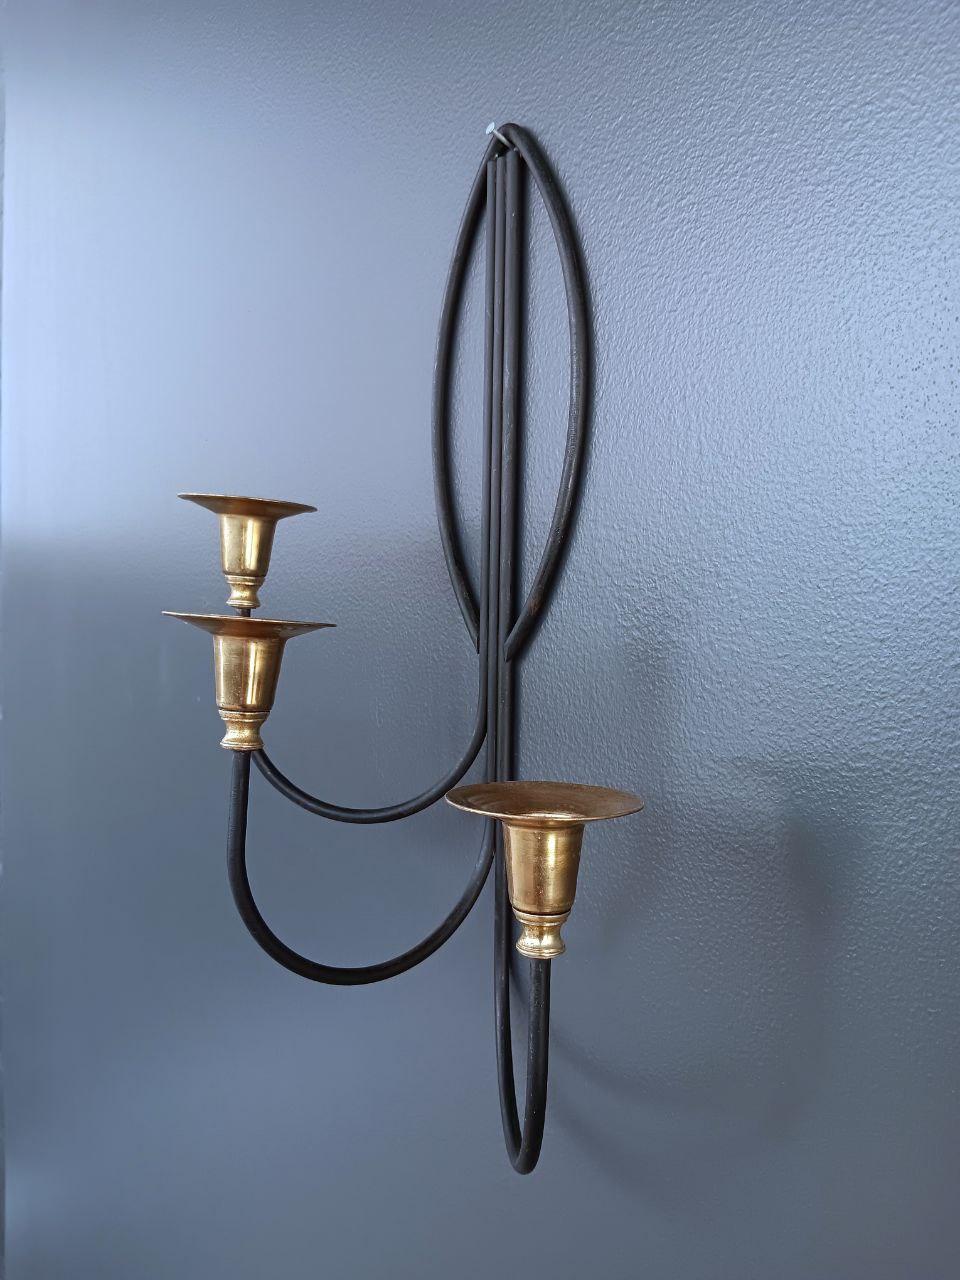 Pair of Mid-Century Modern Iron & Brass Candle Wall Sconces For Sale 1